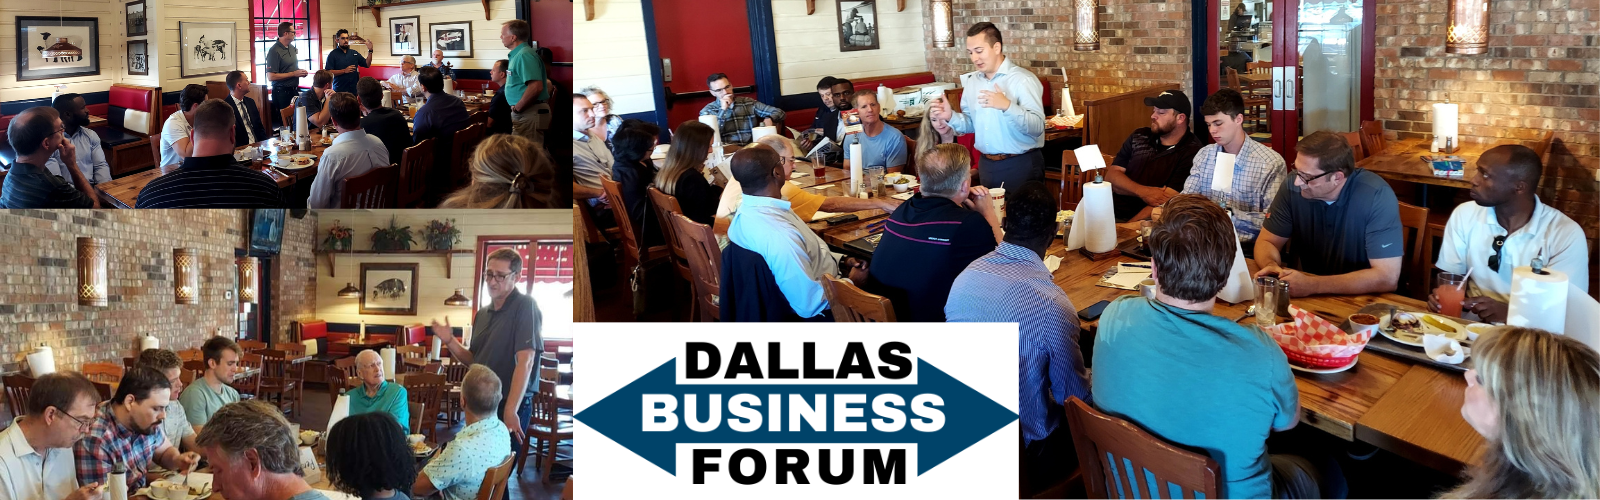 Dallas Christian Business Networking